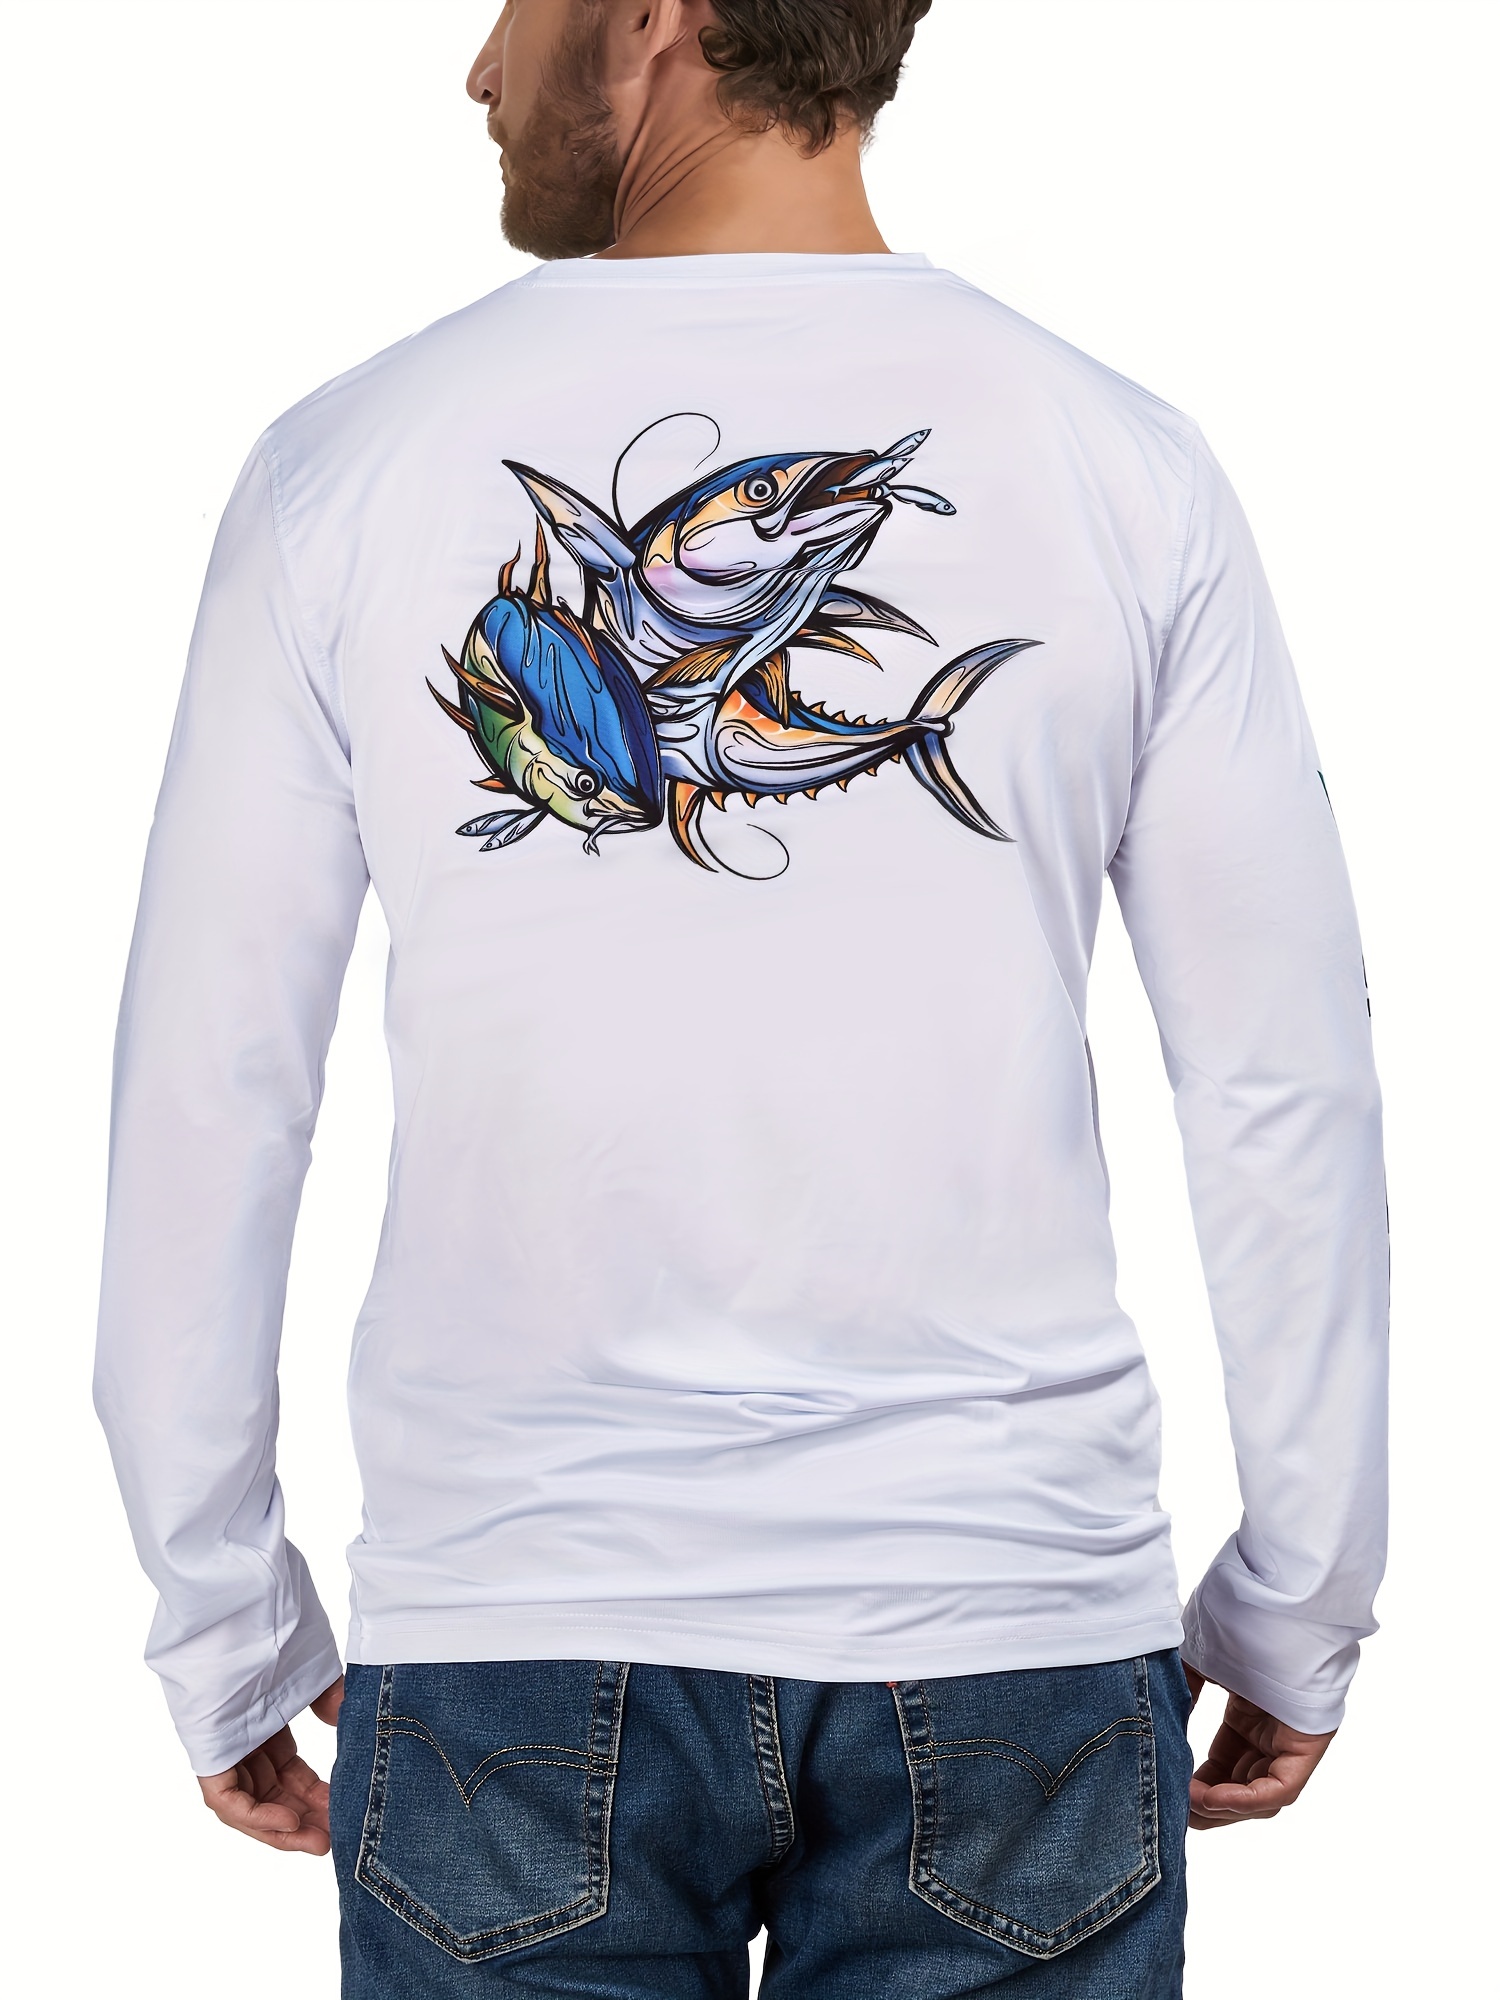 Men's Fishing Shirt with +50 UPF Sun Protection, Breathable Stretchable Long Sleeve Shirt for Men's Fishing Activities,Temu